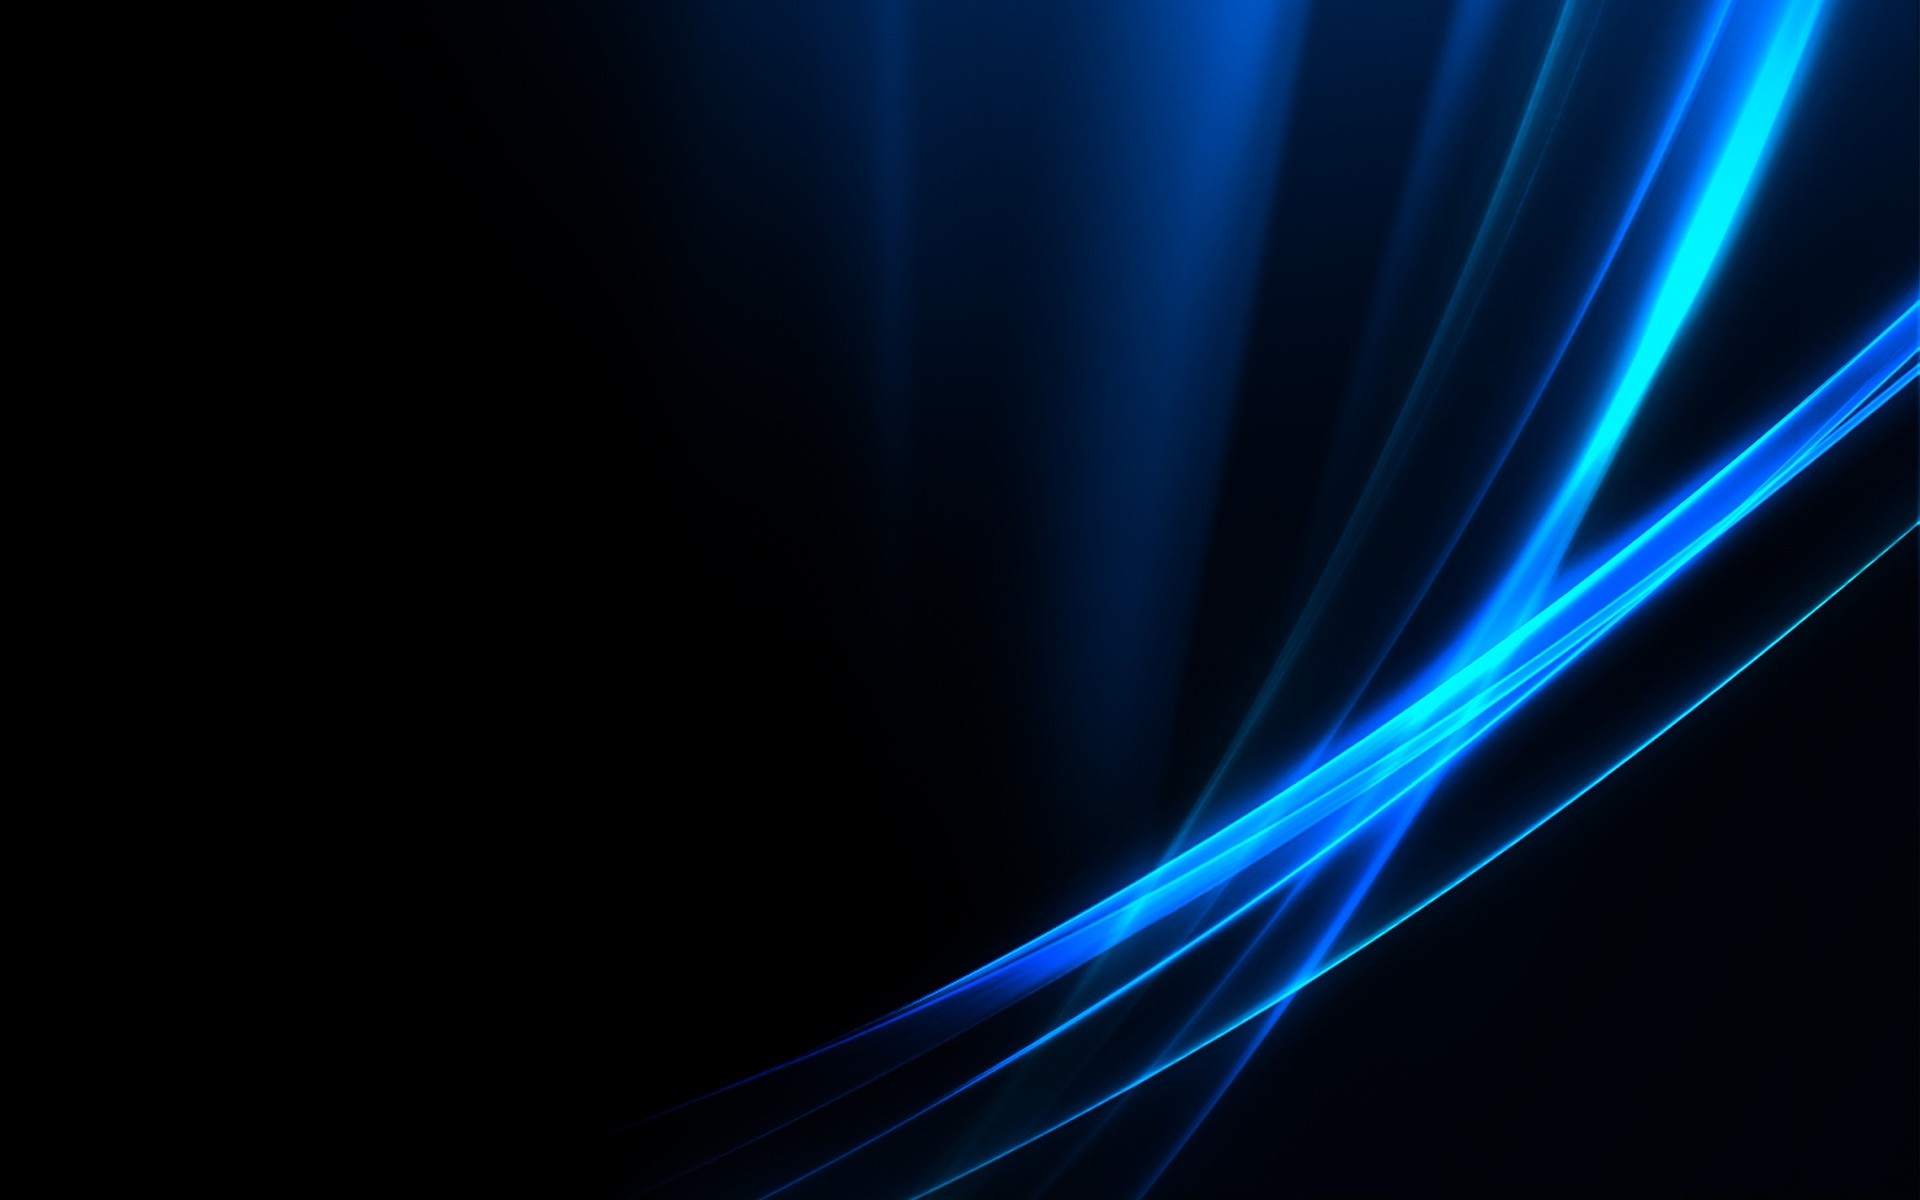 1920x1200 Cool Blue And Black Wallpapers Photo - Kemecer.com